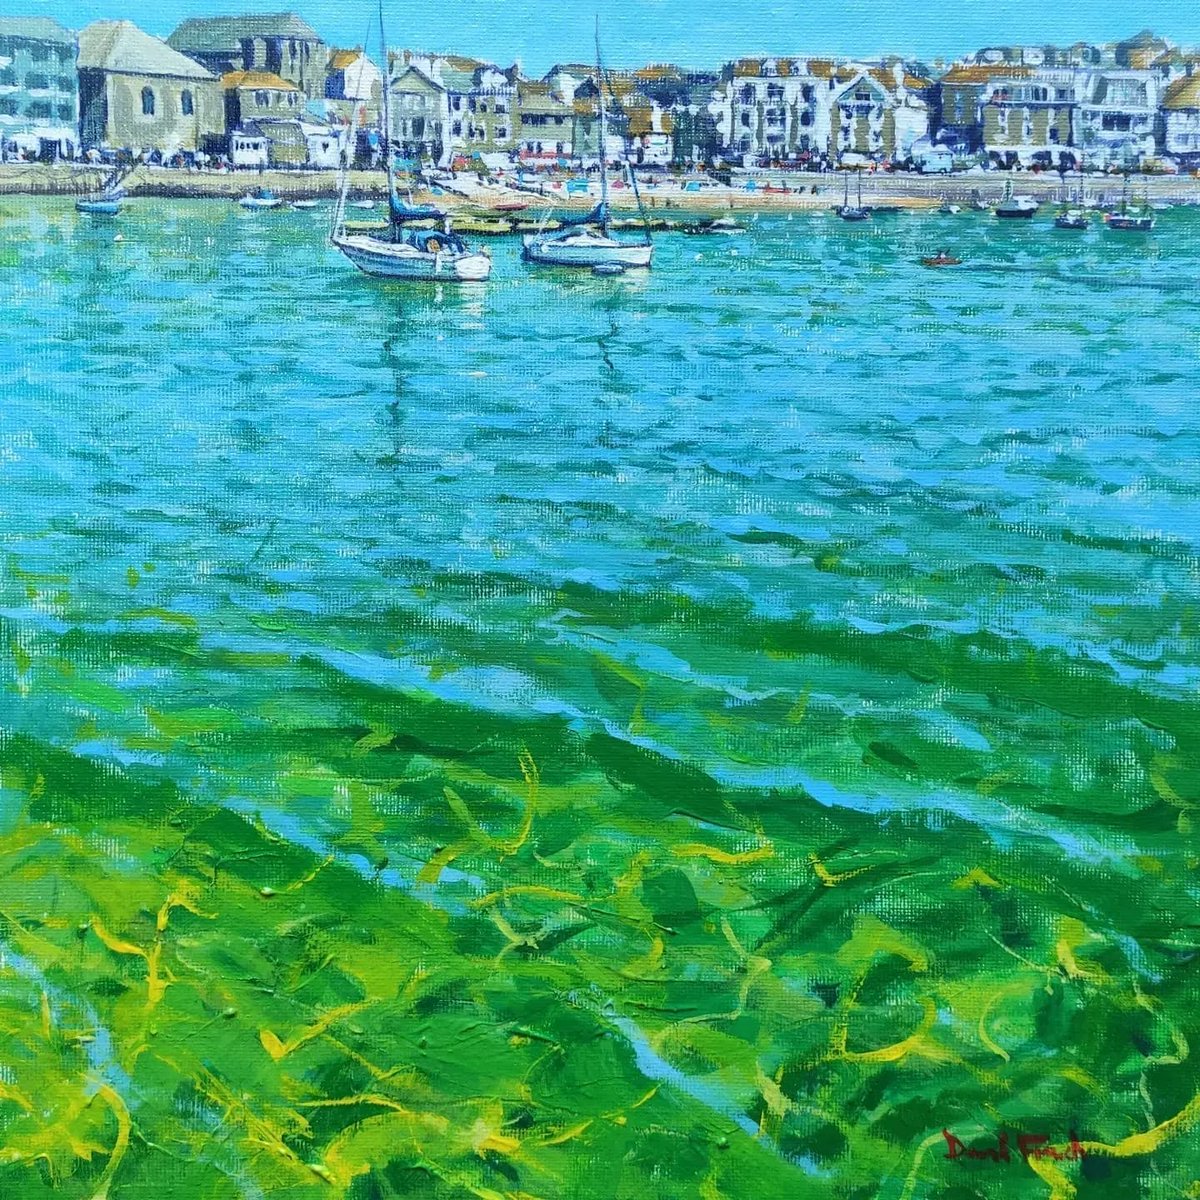 'Two Yachts'

A view across the harbour from the west pier

St Ives
30 X 30cm acrylic on canvas board
49 X 49cm approx framed size

#cornwall
#www.thearthouses.com
#arthousestives

Available at the Arthouse Gallery Island Road St Ives Cornwall.... now 

#stives
#escape
#yachts